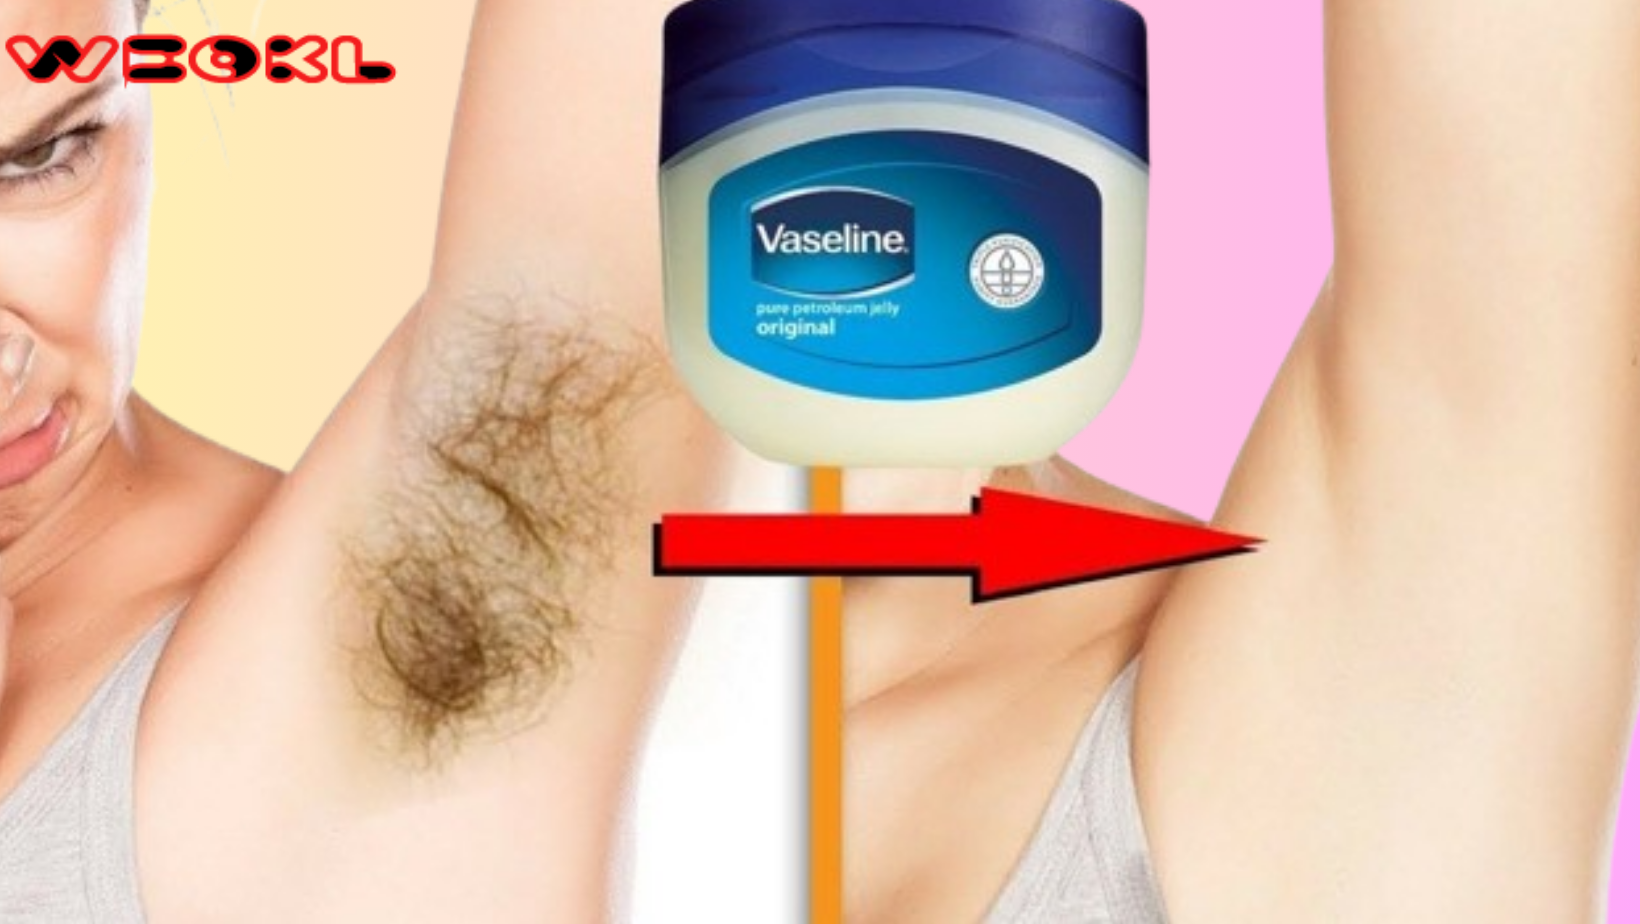 This trick can help you remove unwanted hair on your body and face